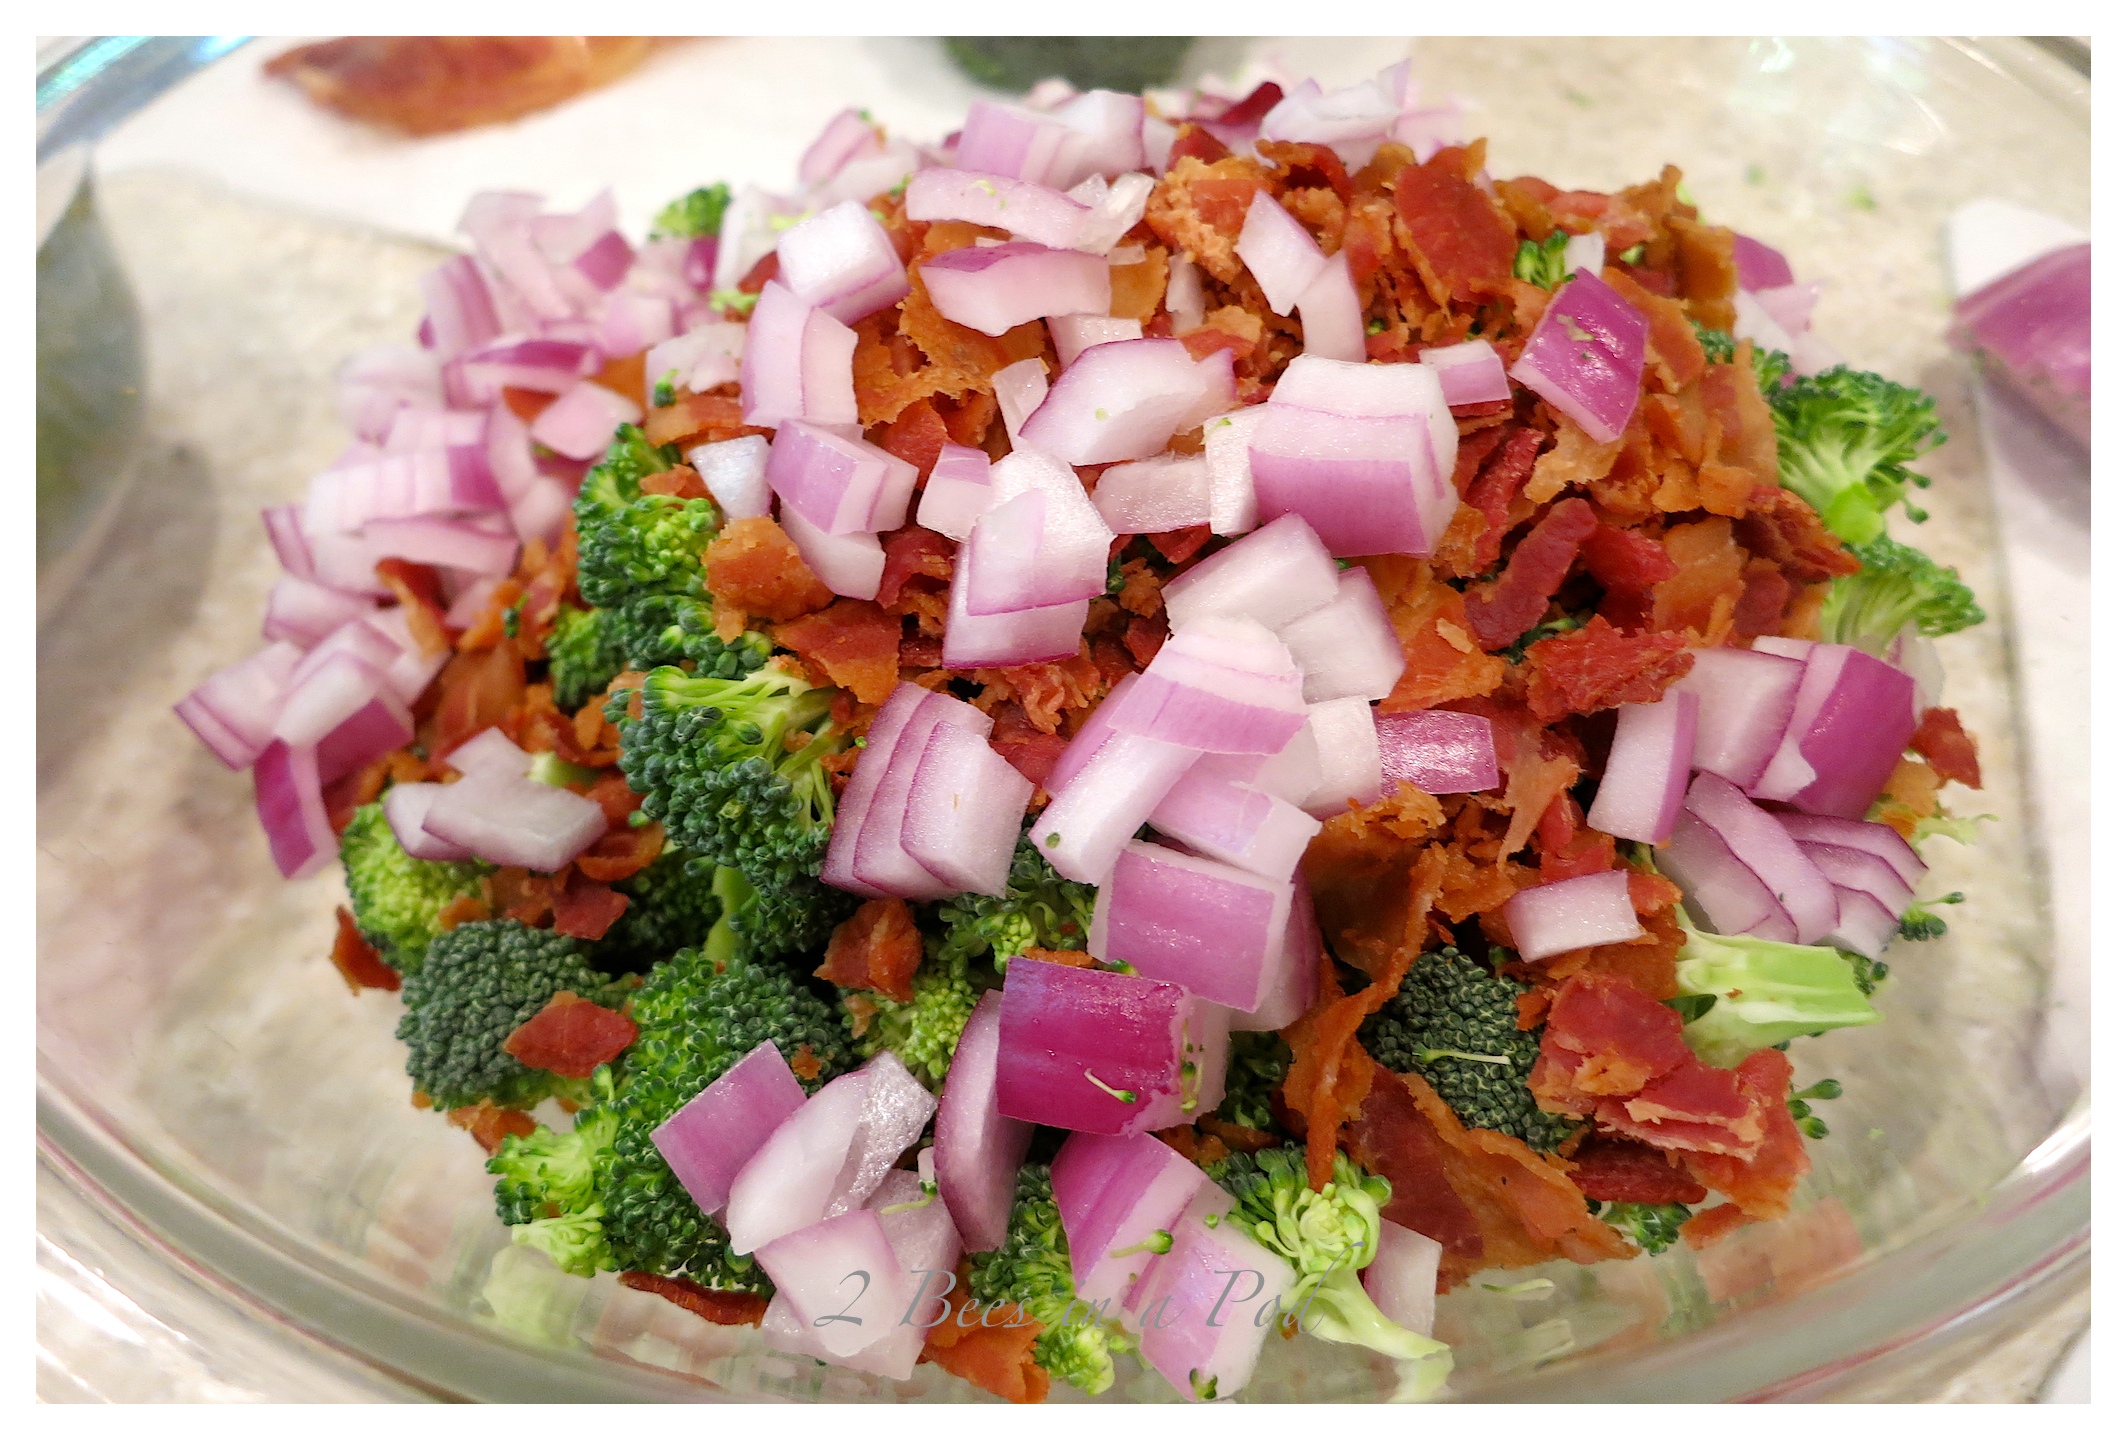 Southern Broccoli Salad. Smokey bacon, tangy vinegar , broccoli, red onion. Great picnic or cookout salad.